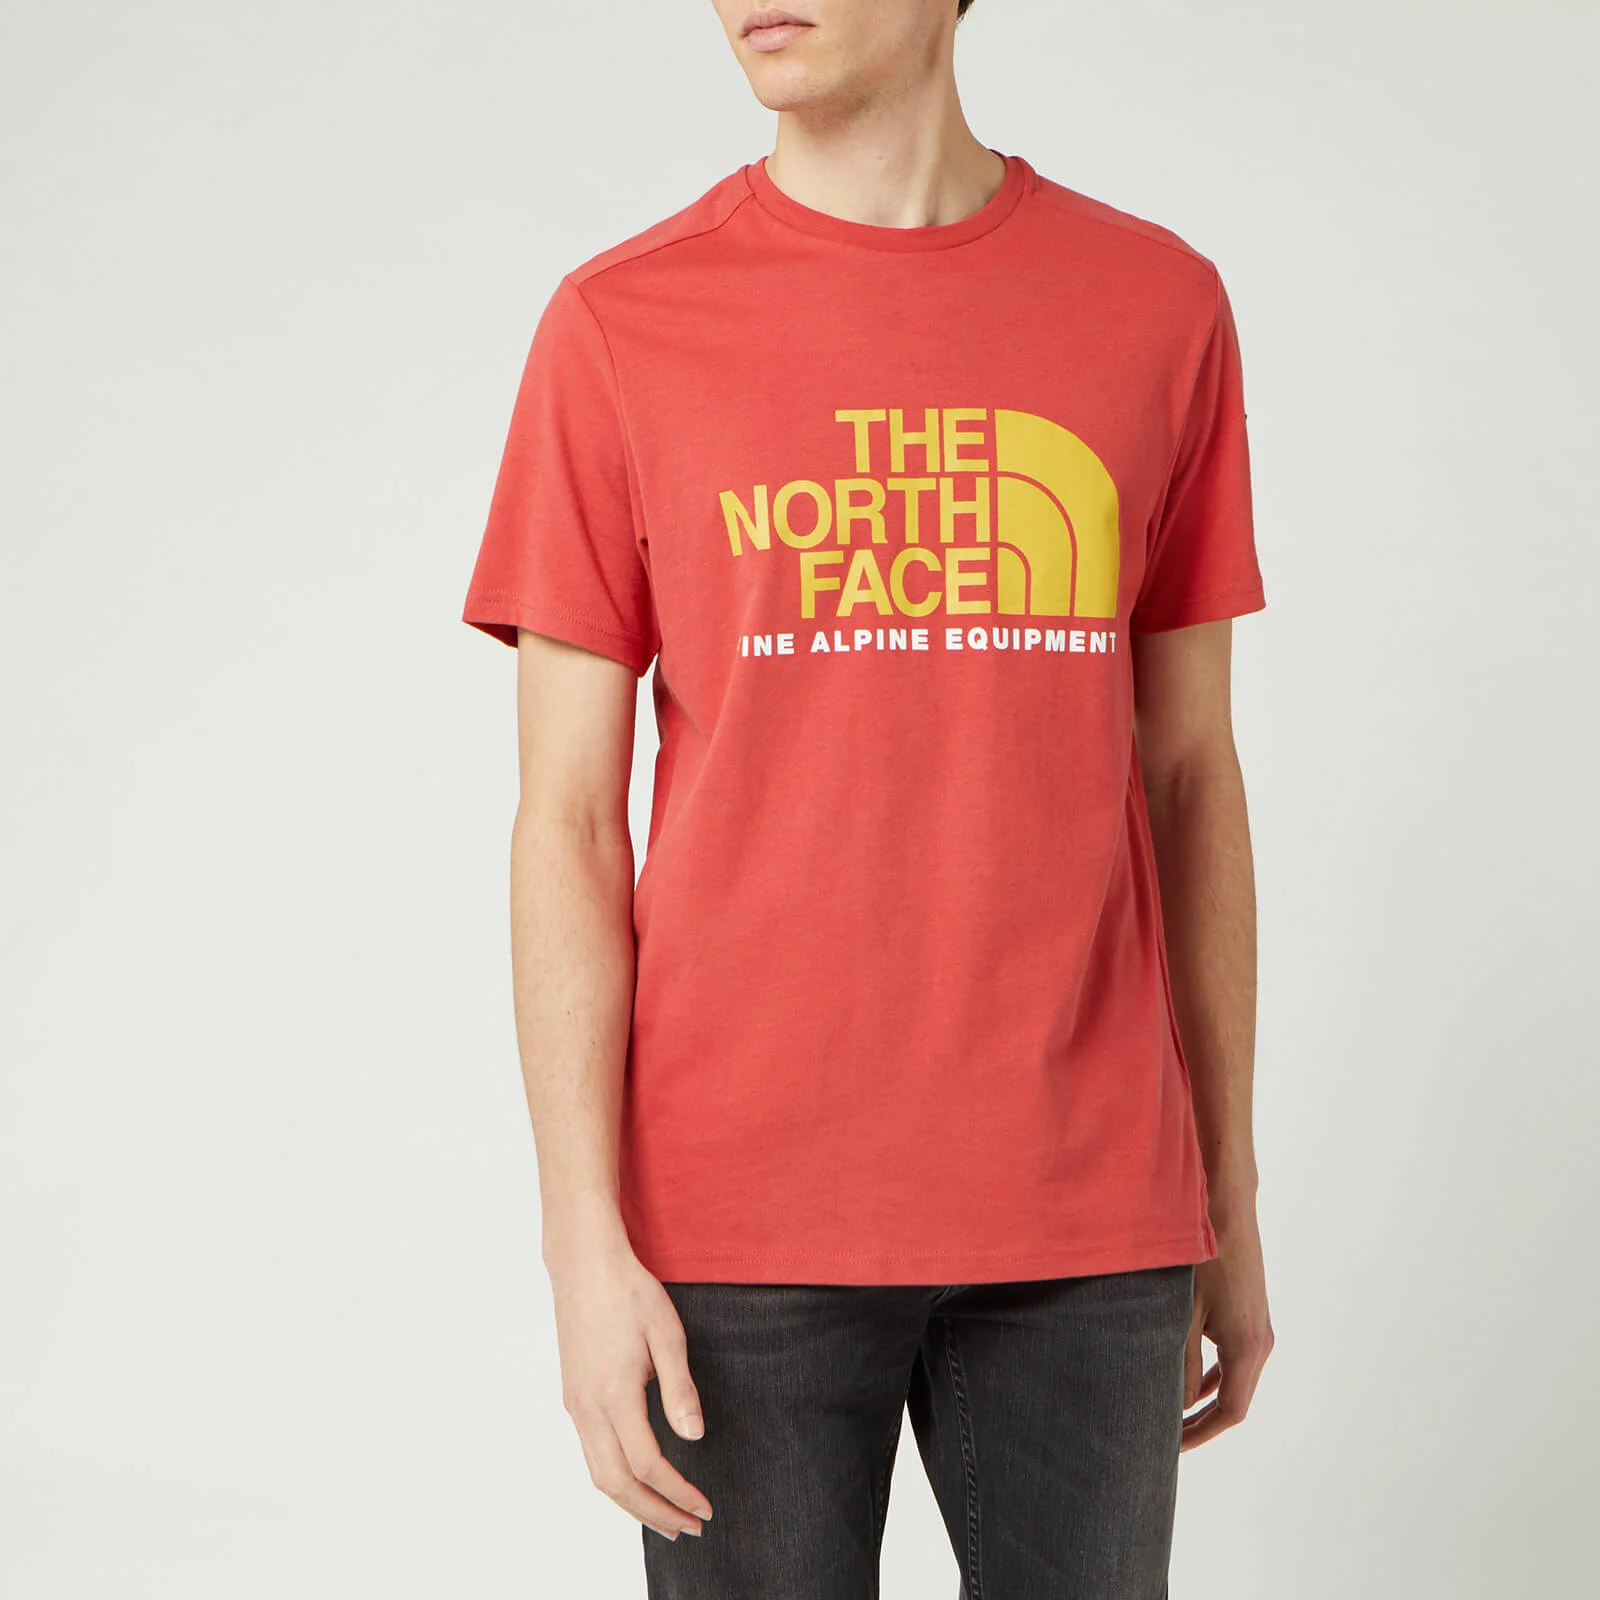 The North Face Men's Fine Alpine 2 T-Shirt - Sunbaked Red Image 1